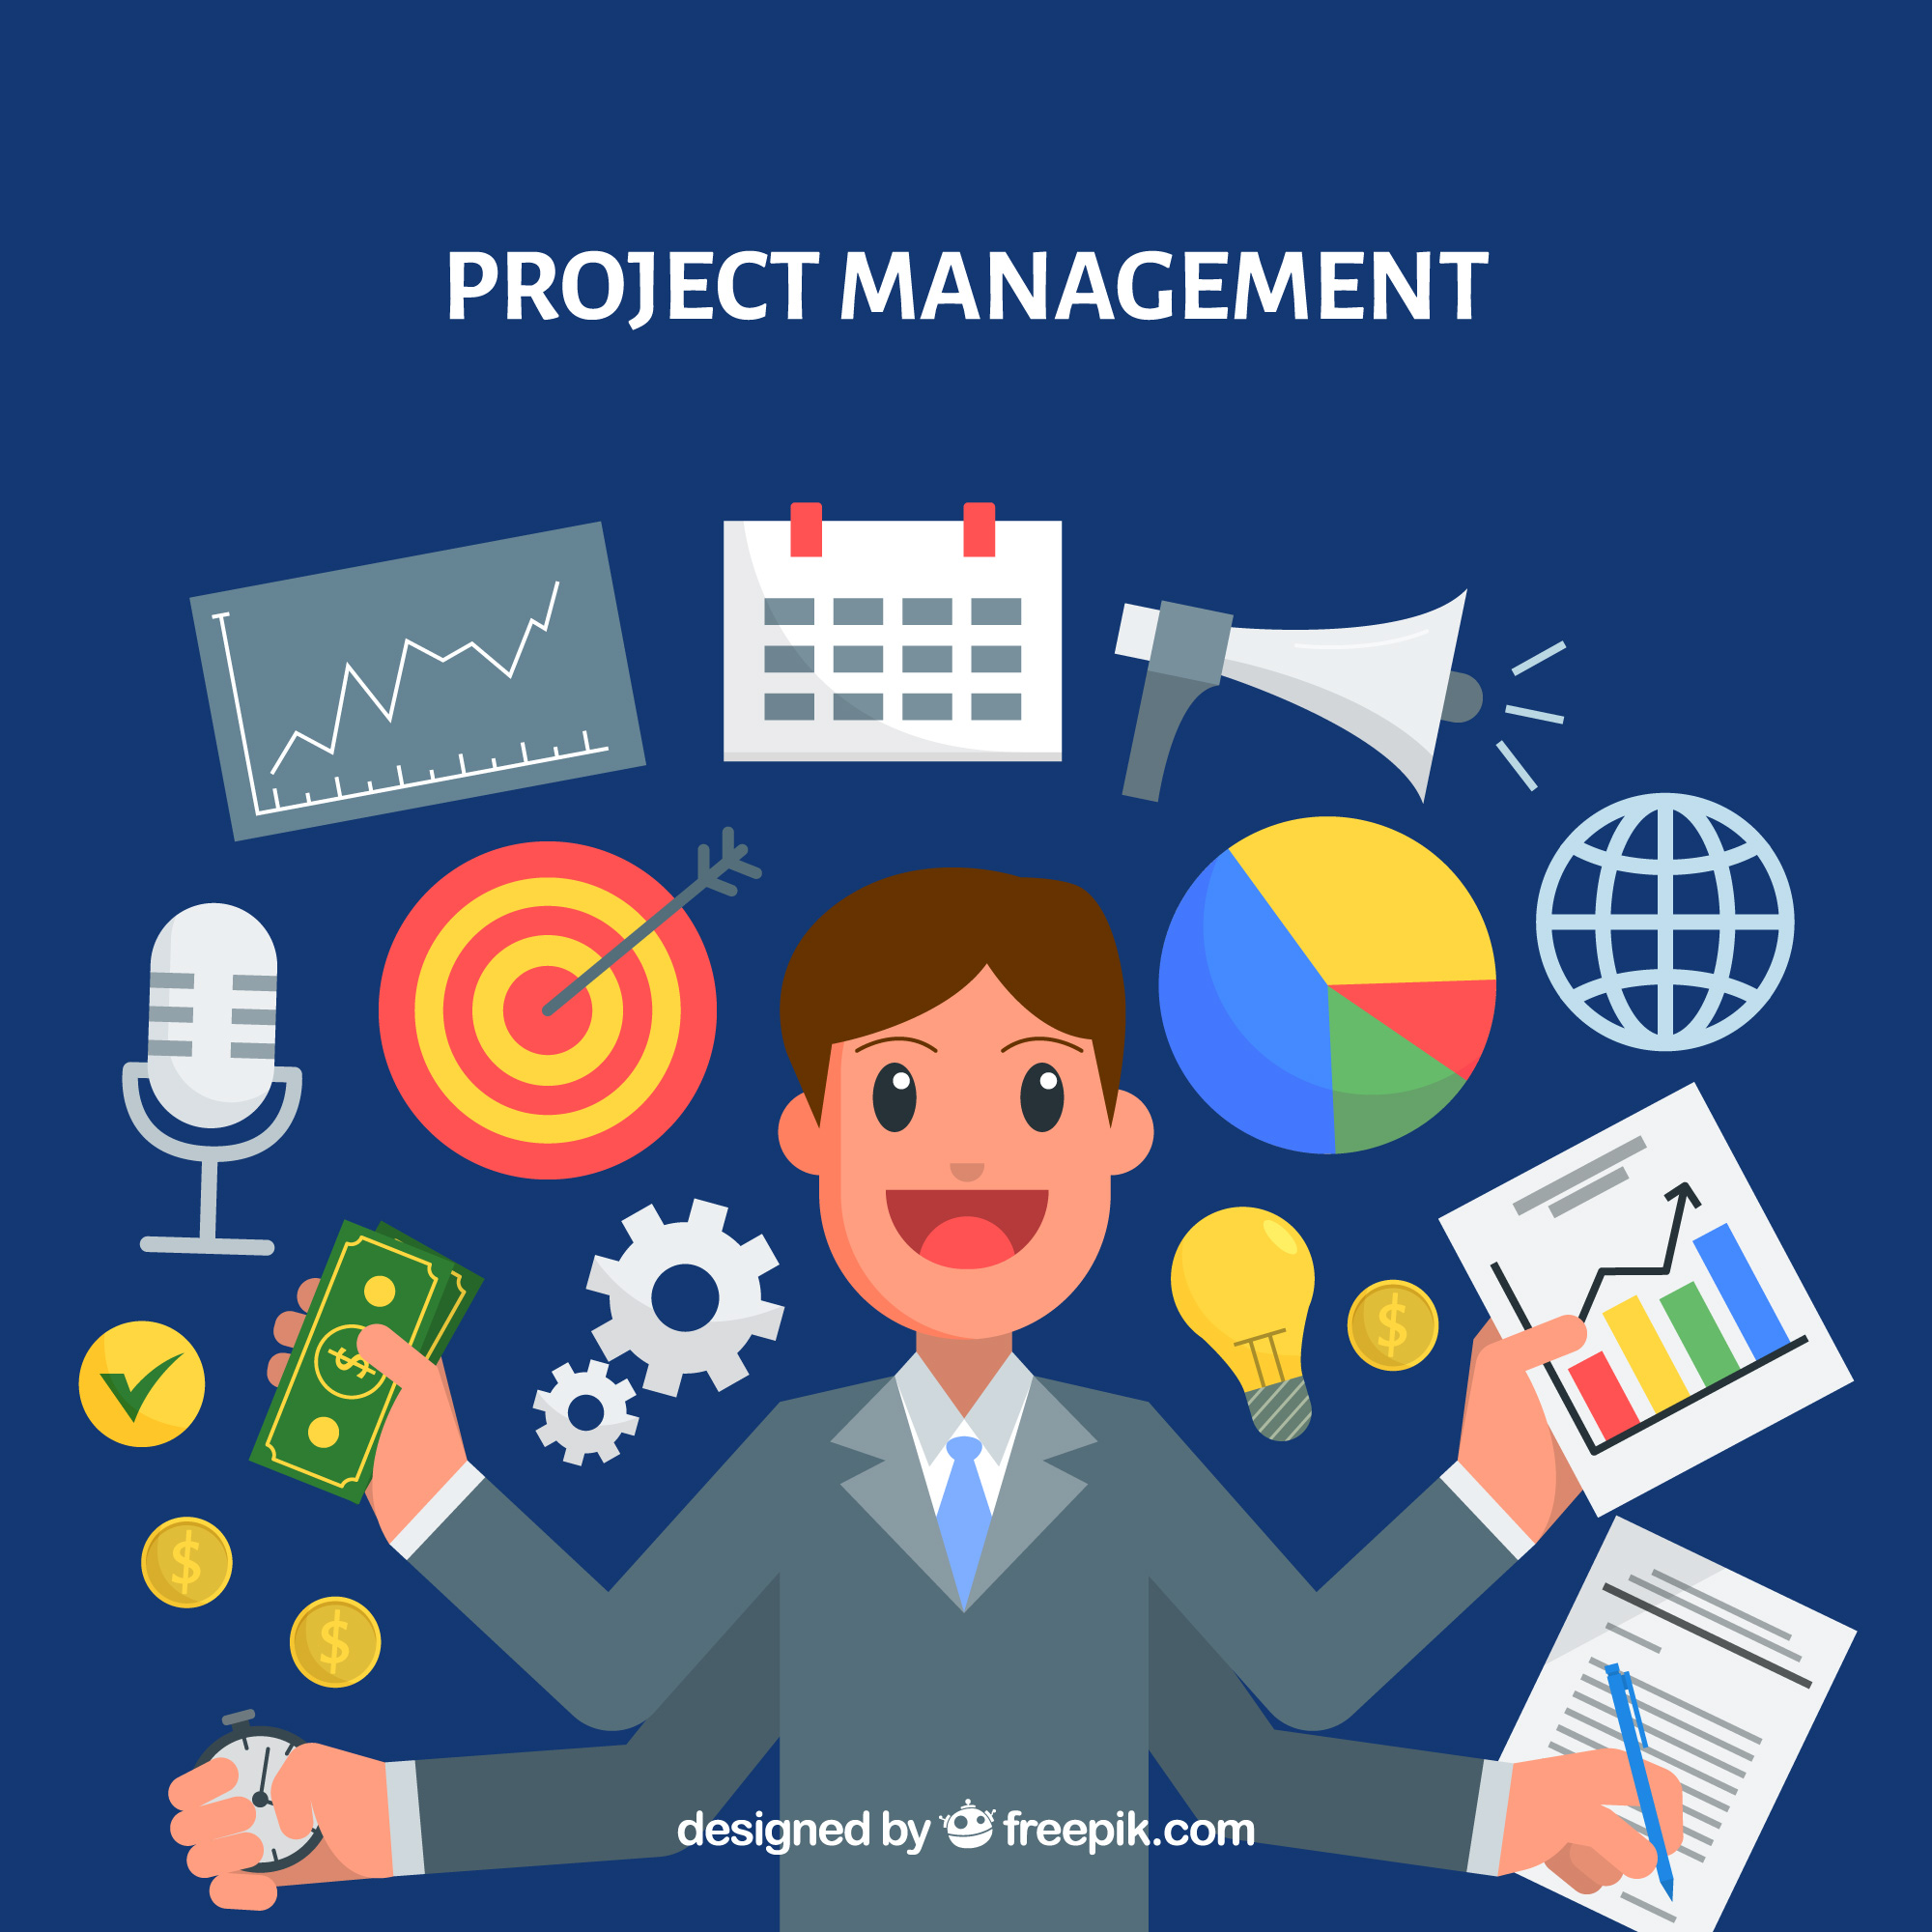 Project Management – Conduct and Best Practices for Stakeholder Management